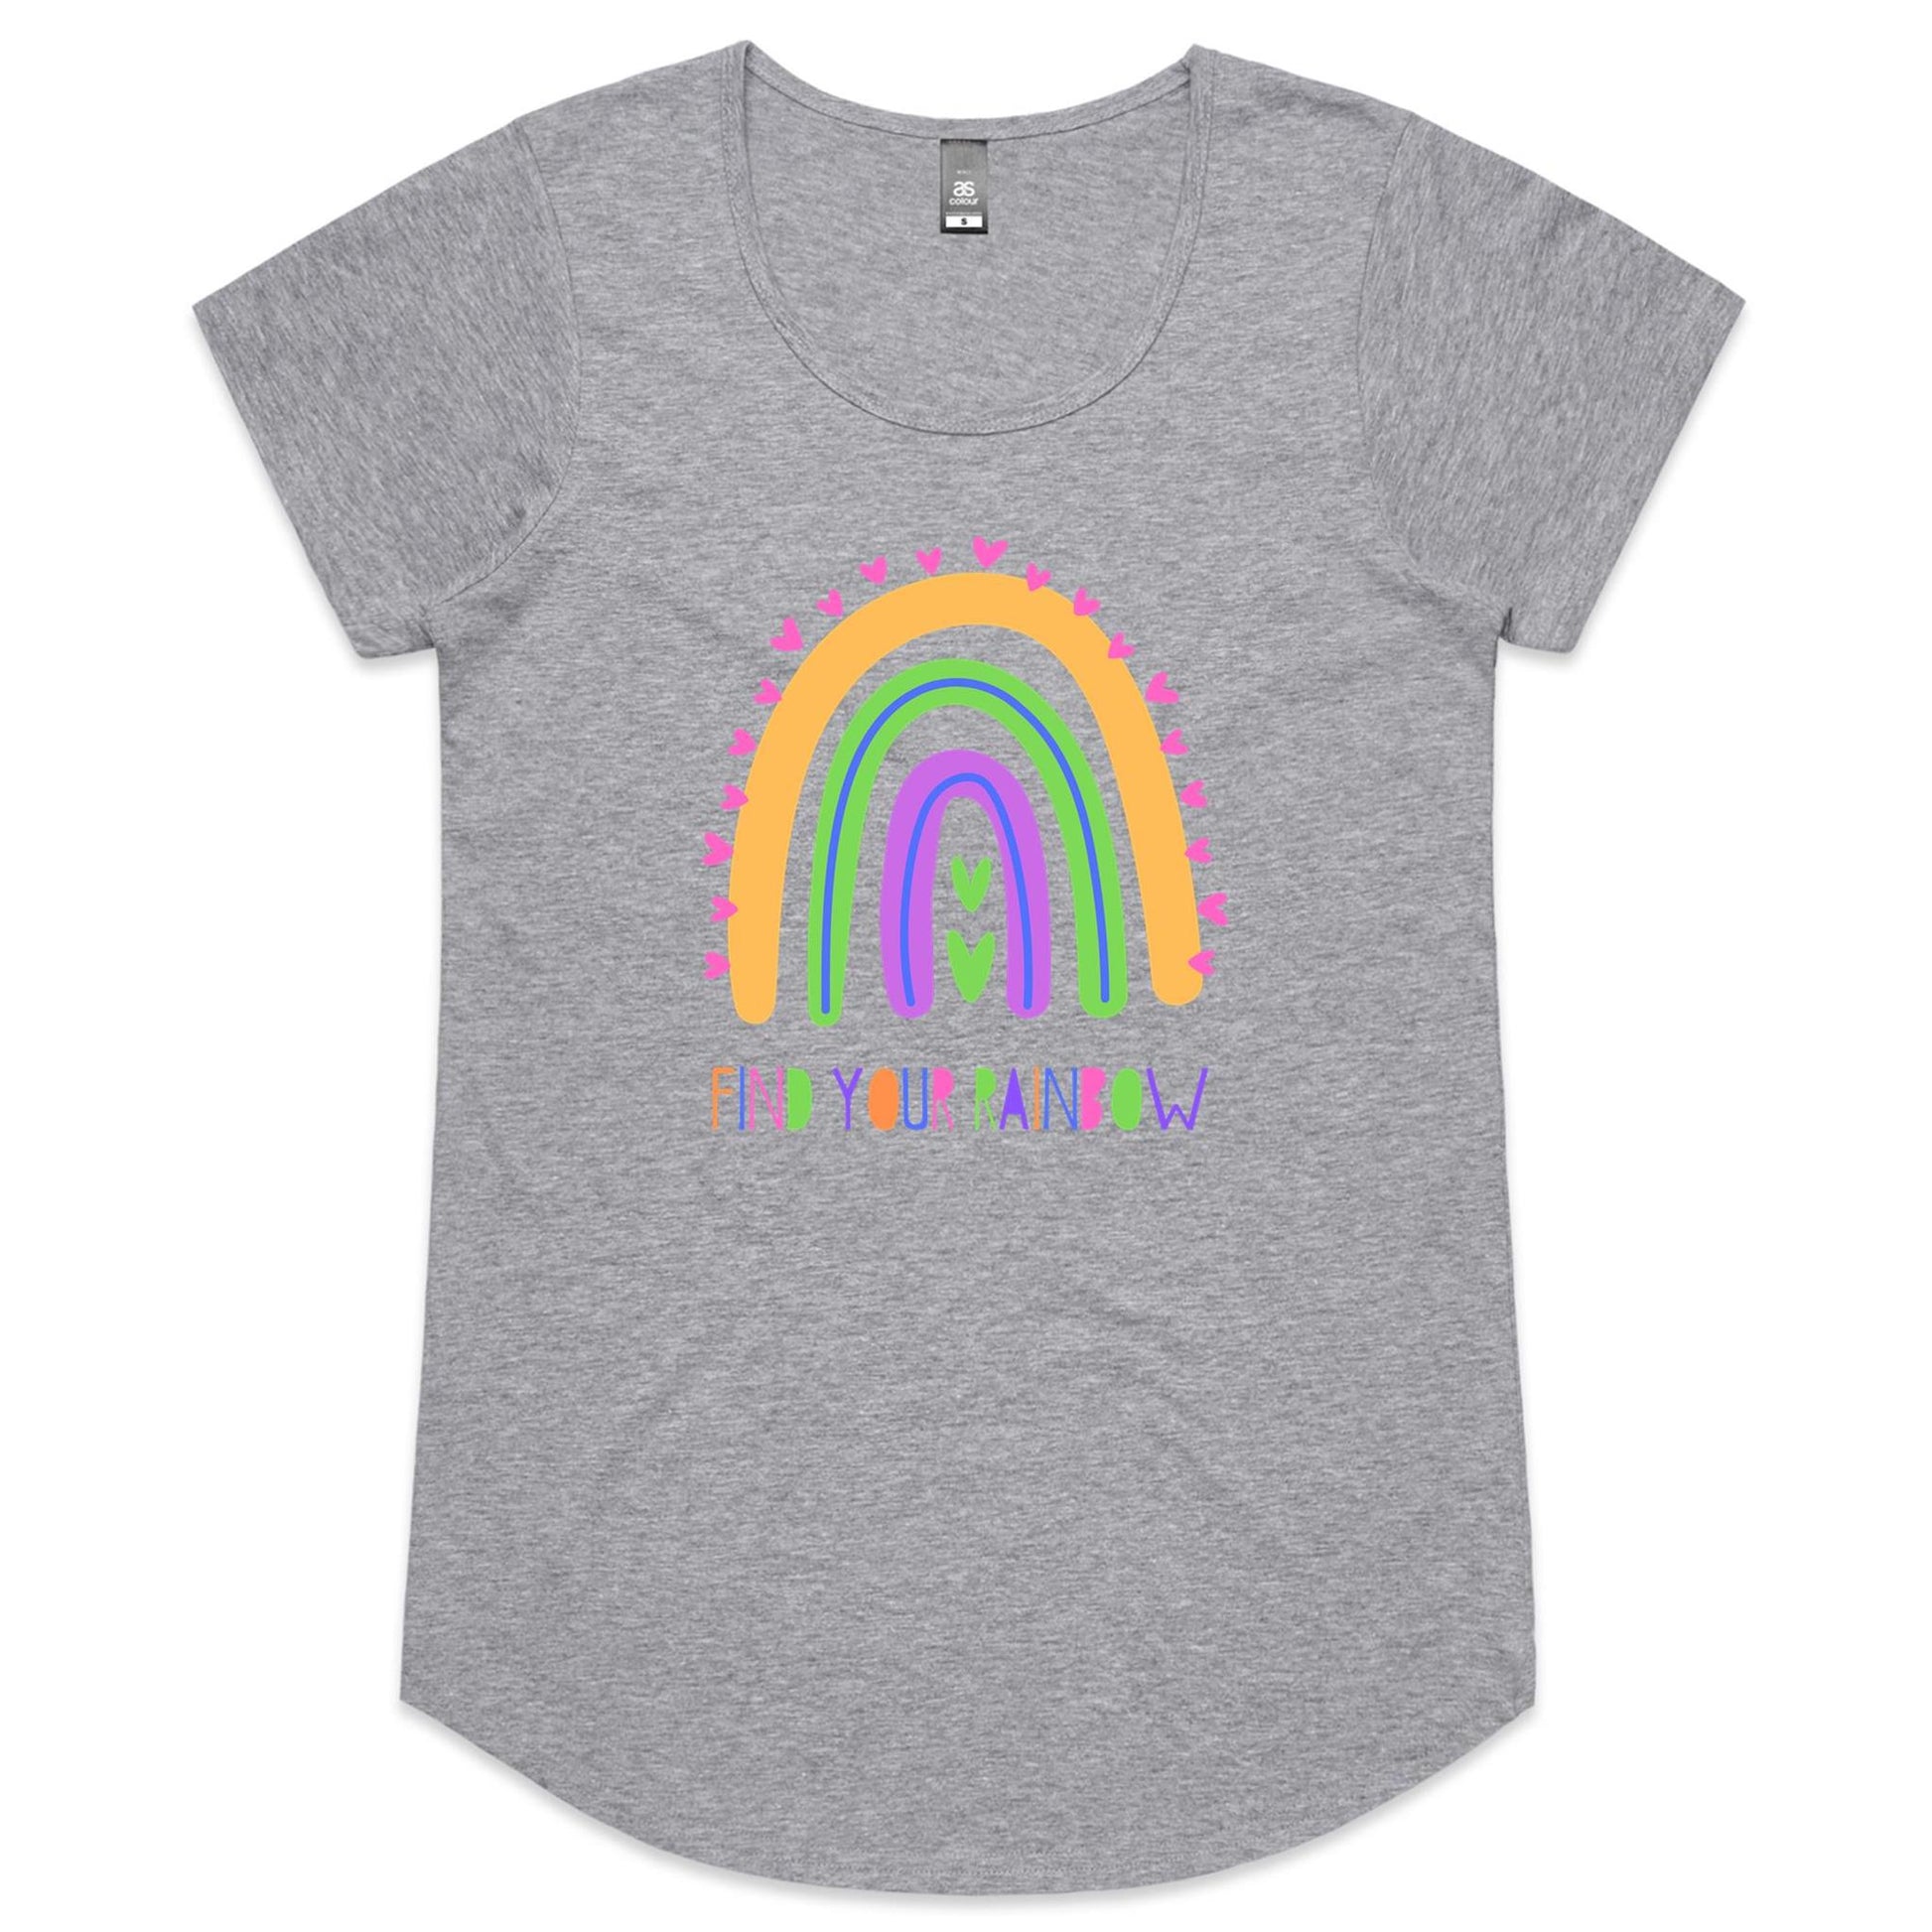 Find Your Rainbow - Womens Scoop Neck T-Shirt Grey Marle Womens Scoop Neck T-shirt Womens